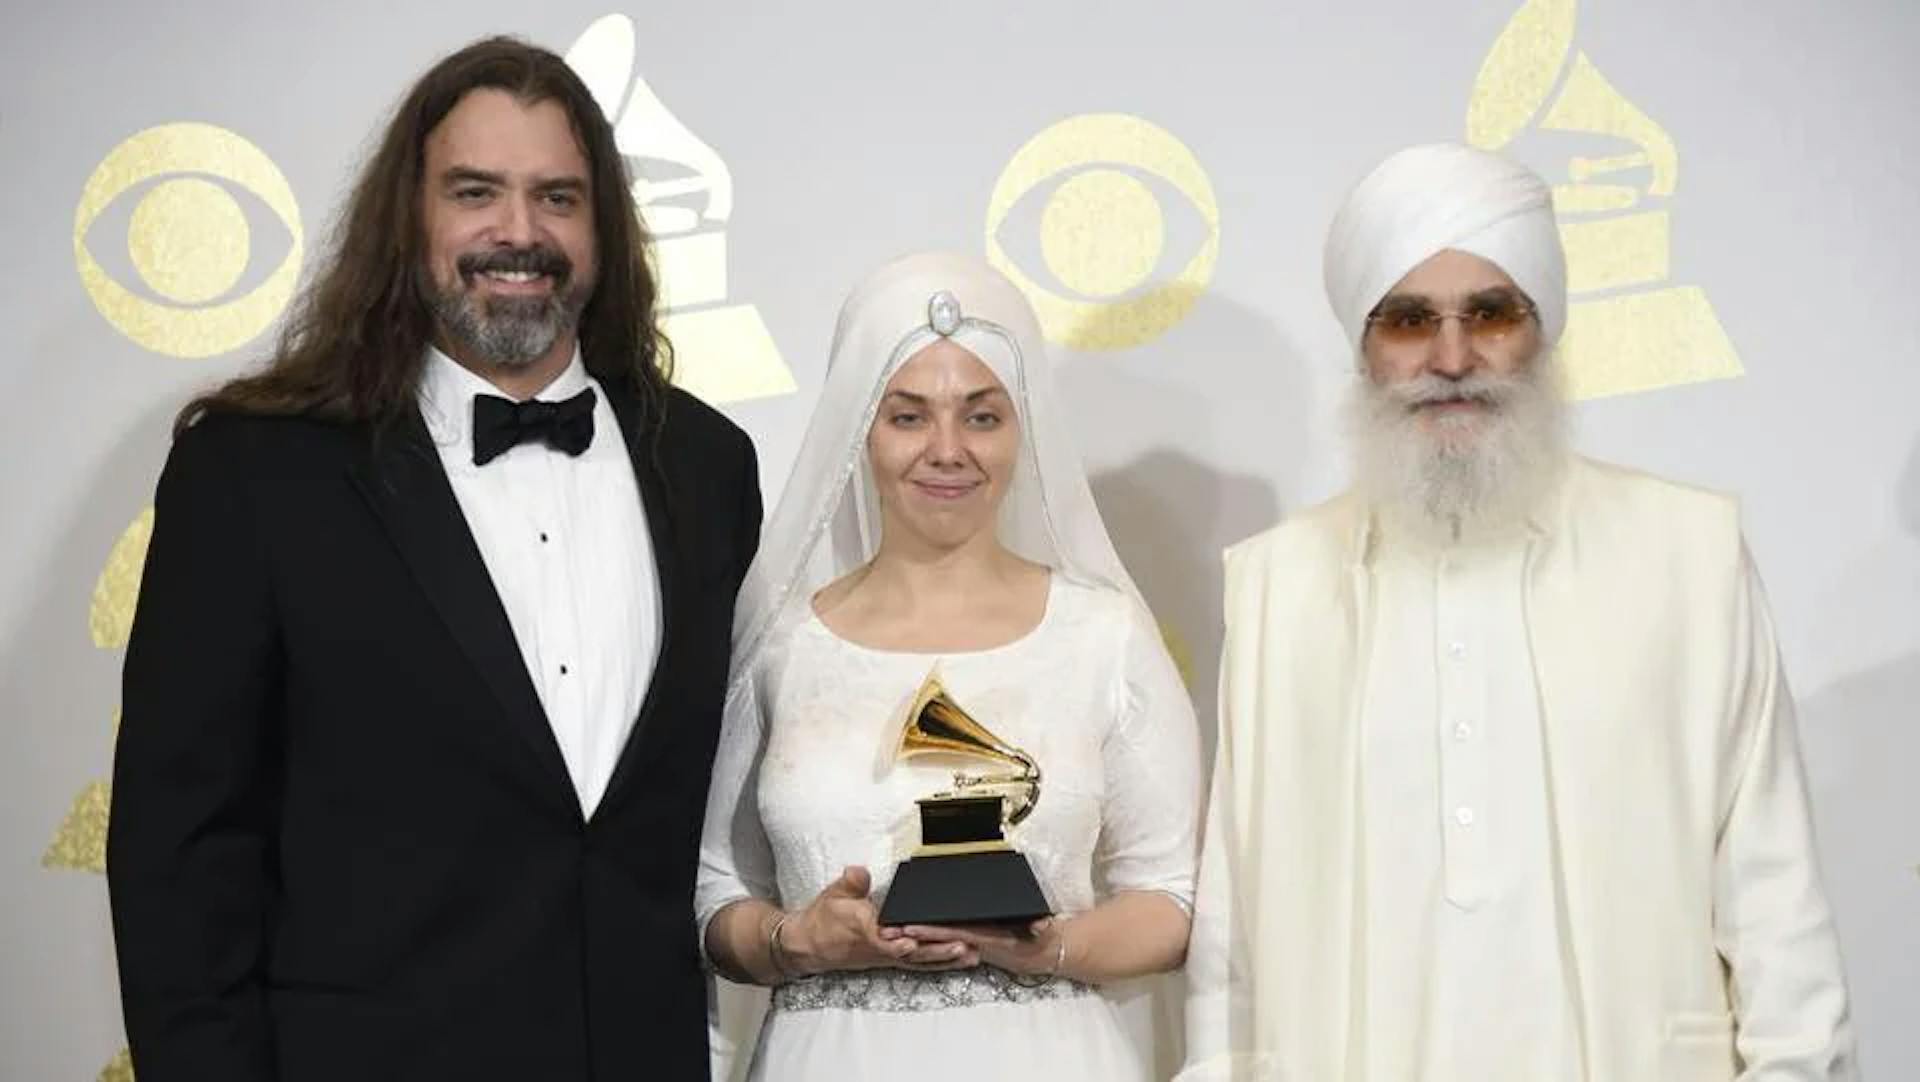 White Suns after accepting Grammy win in 2017